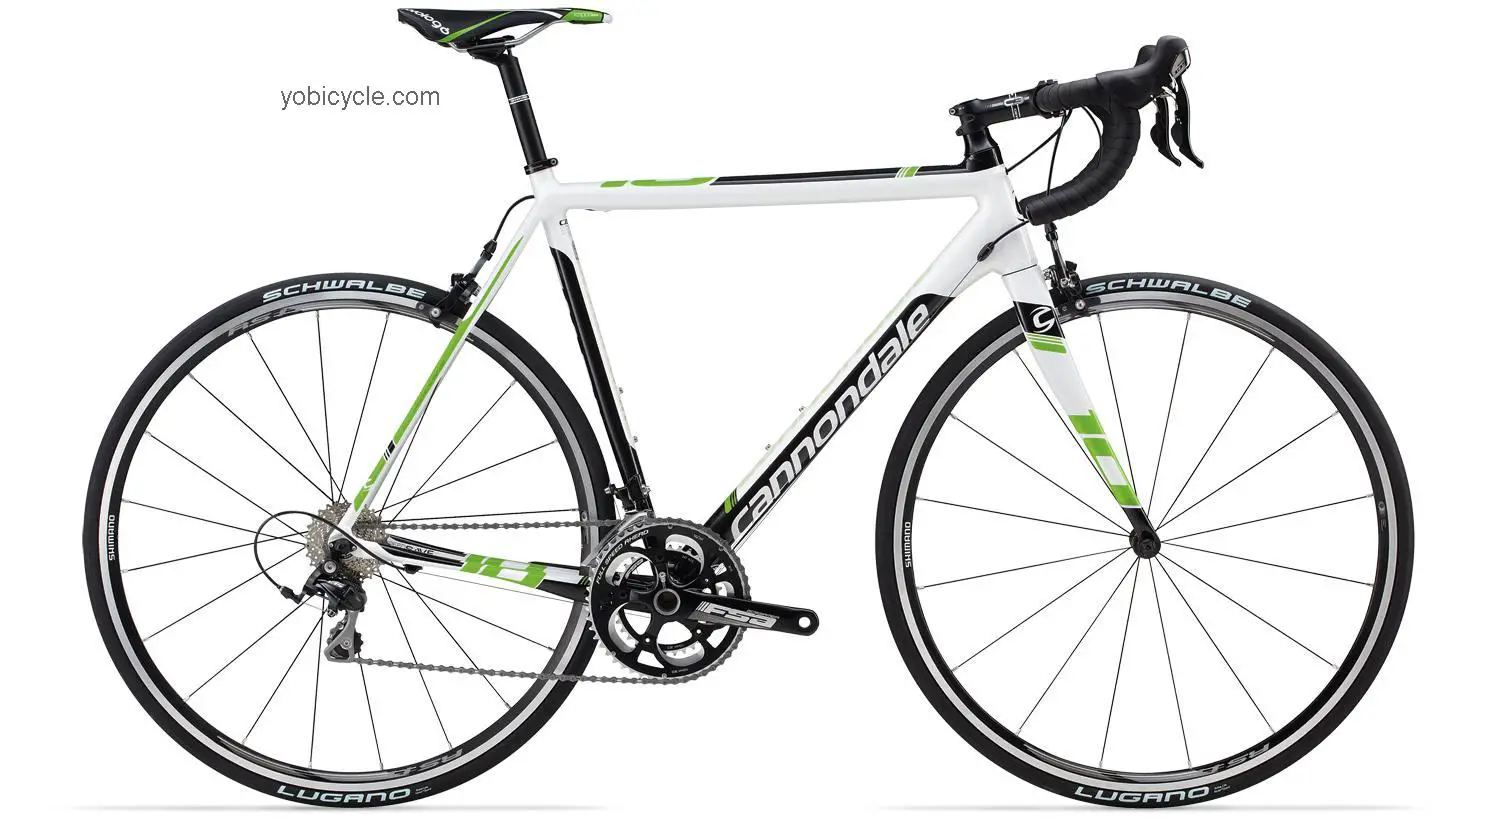 Cannondale CAAD10 5 105 Double competitors and comparison tool online specs and performance